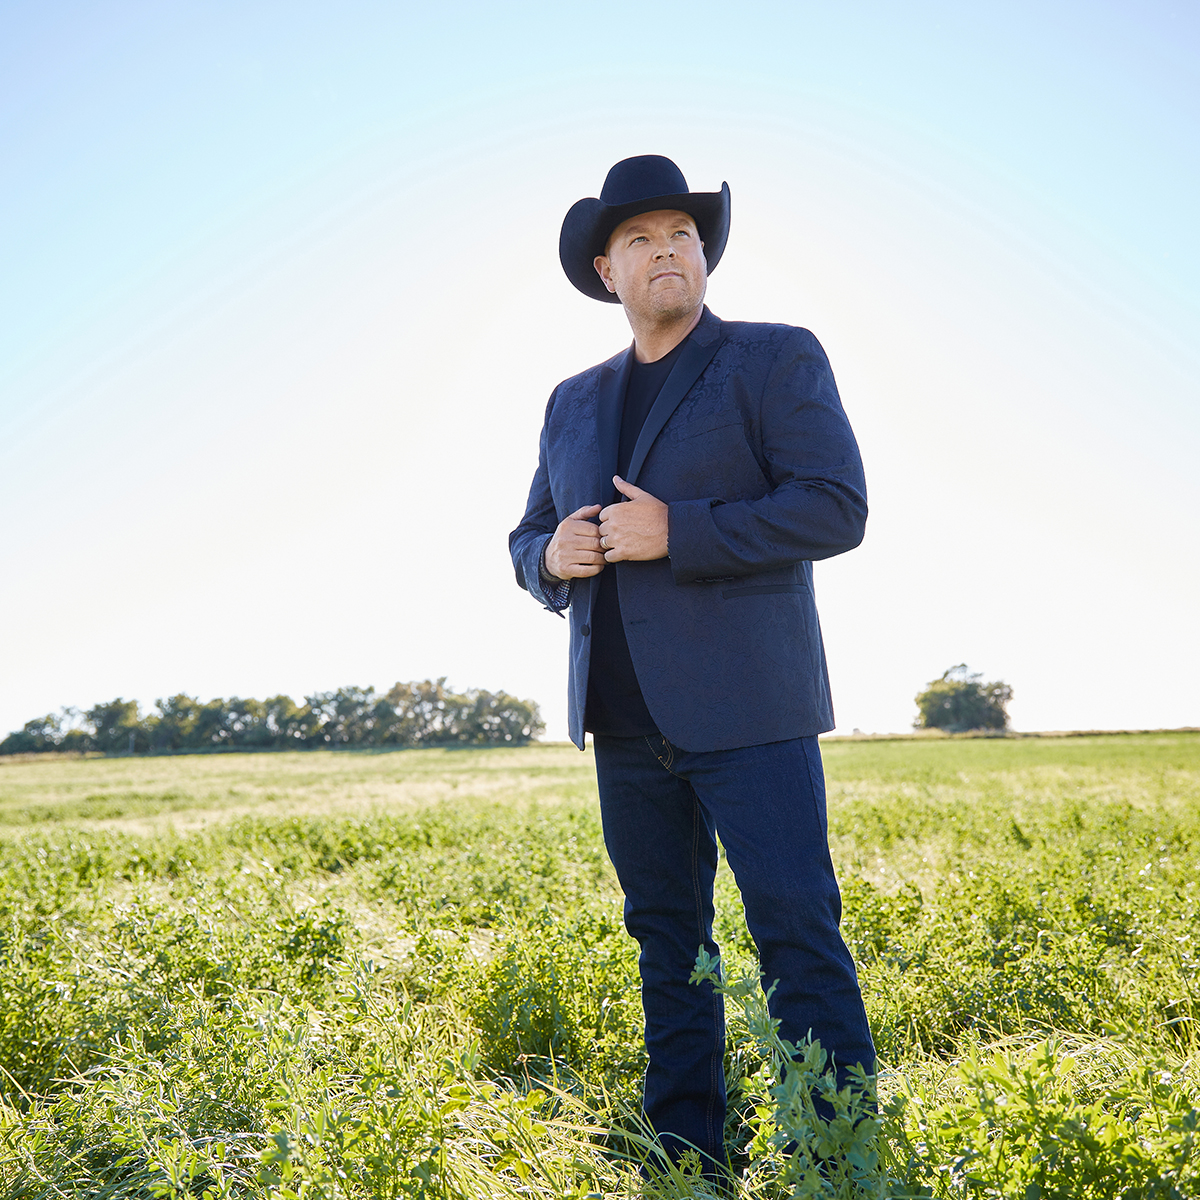 Gord Bamford To Release New Album Diamonds In A Whiskey Glass On June 4th Via Anthem Records